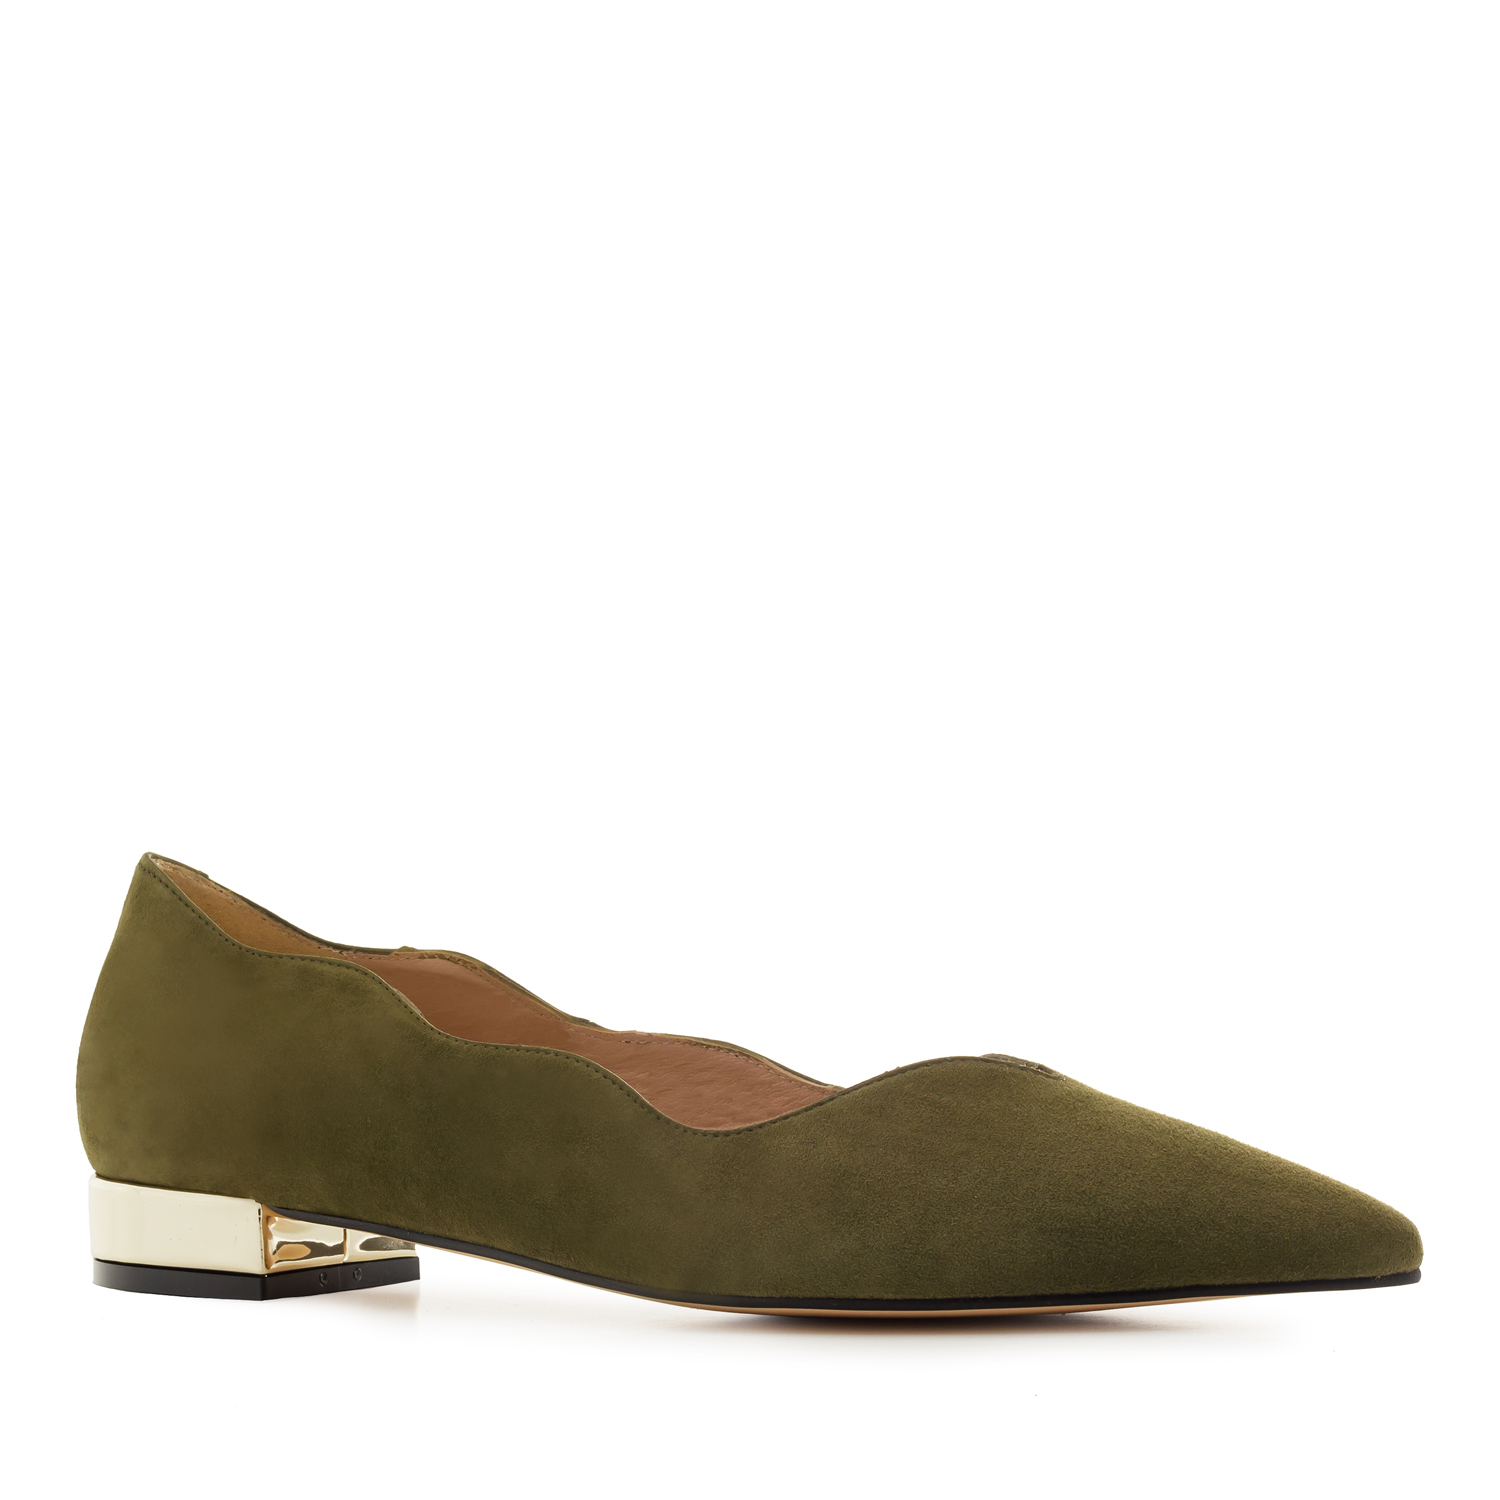 Waved Upper Ballet Flats in Olive Green Nappa Leather 